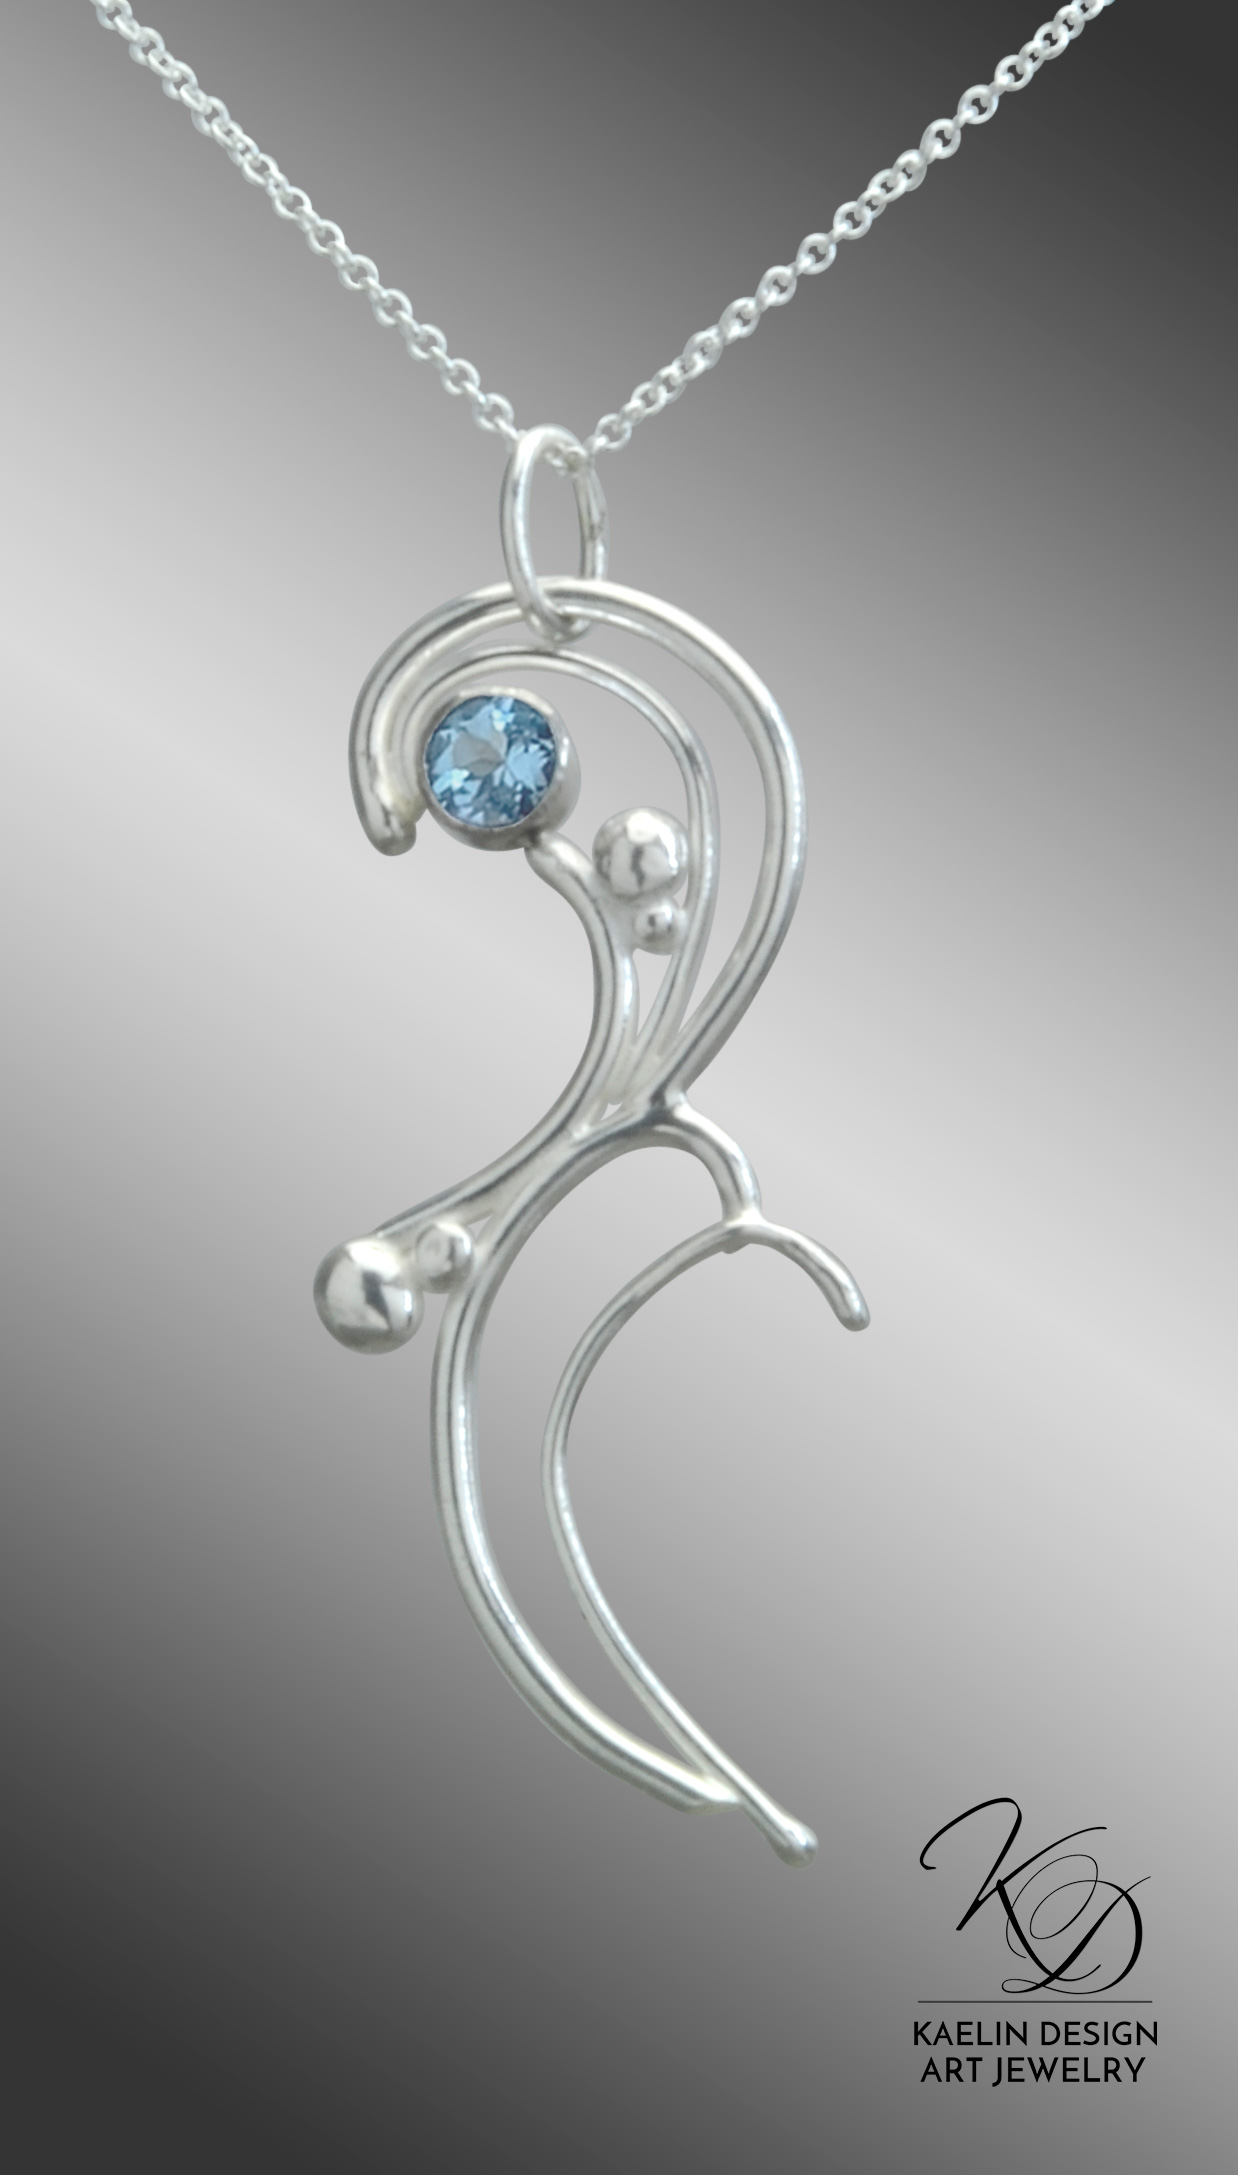 Talise Blue Topaz and Hand Forged Sterling Silver Art Jewelry Pendant by Kaelin Design